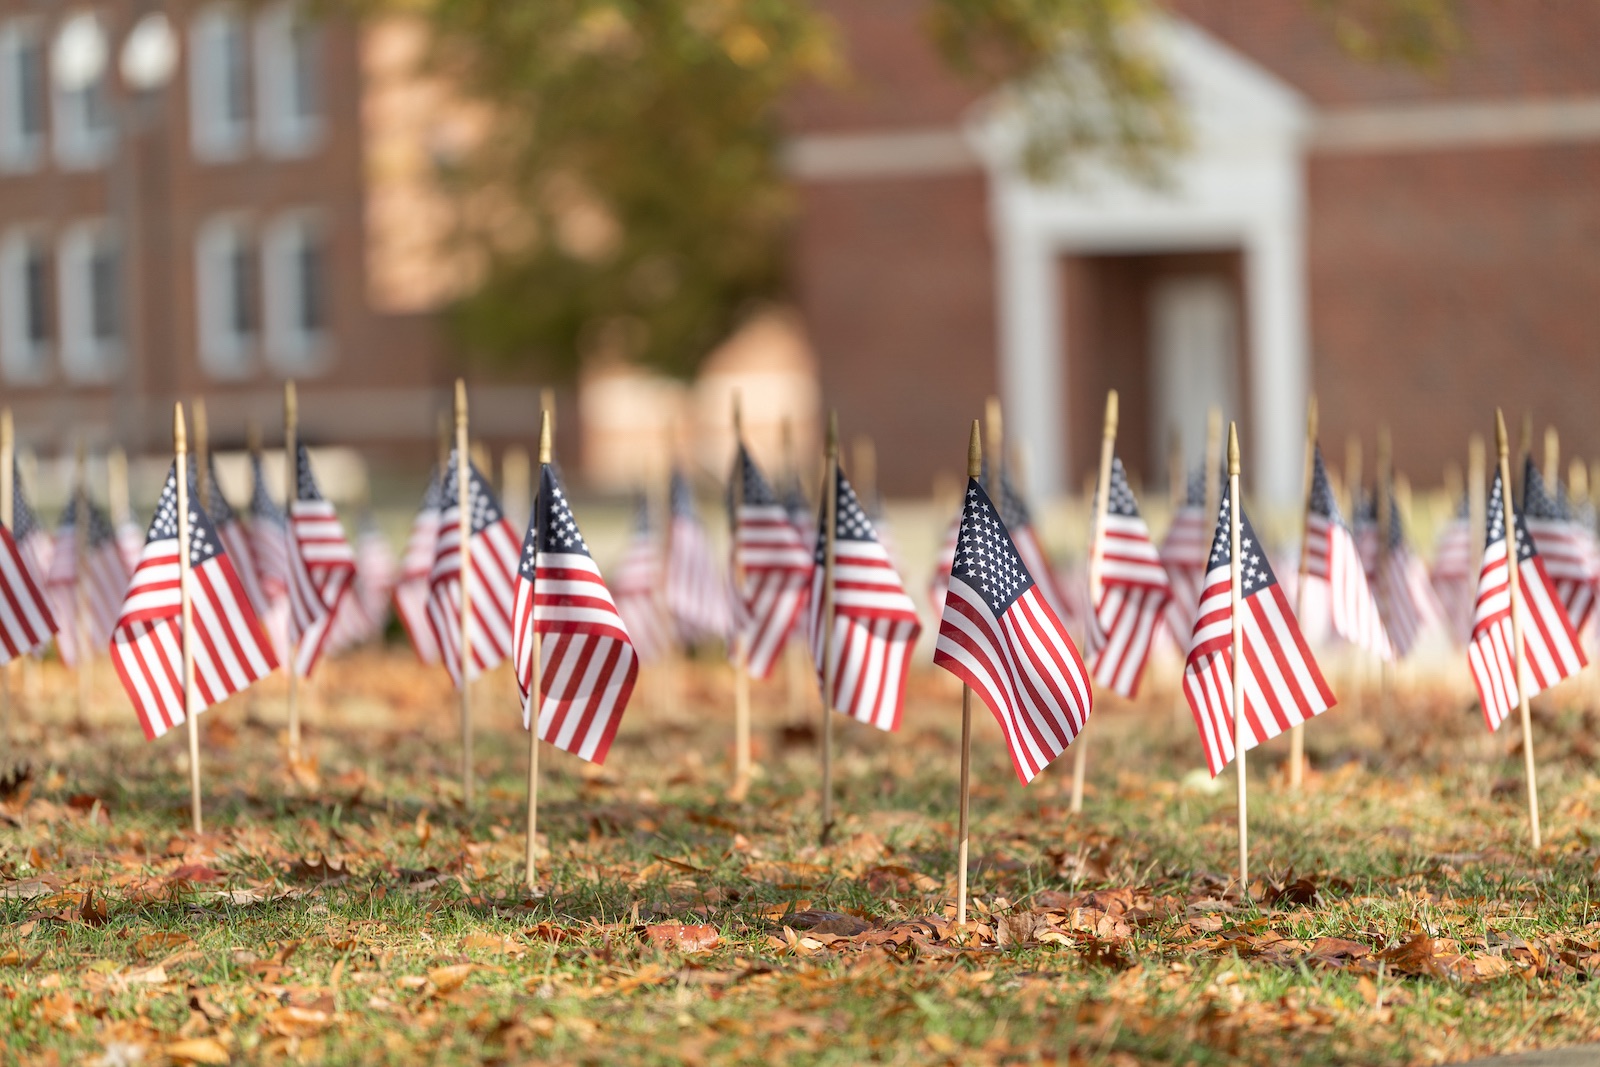 Flags are placed around Tech's campus in honor of Veterans Day.